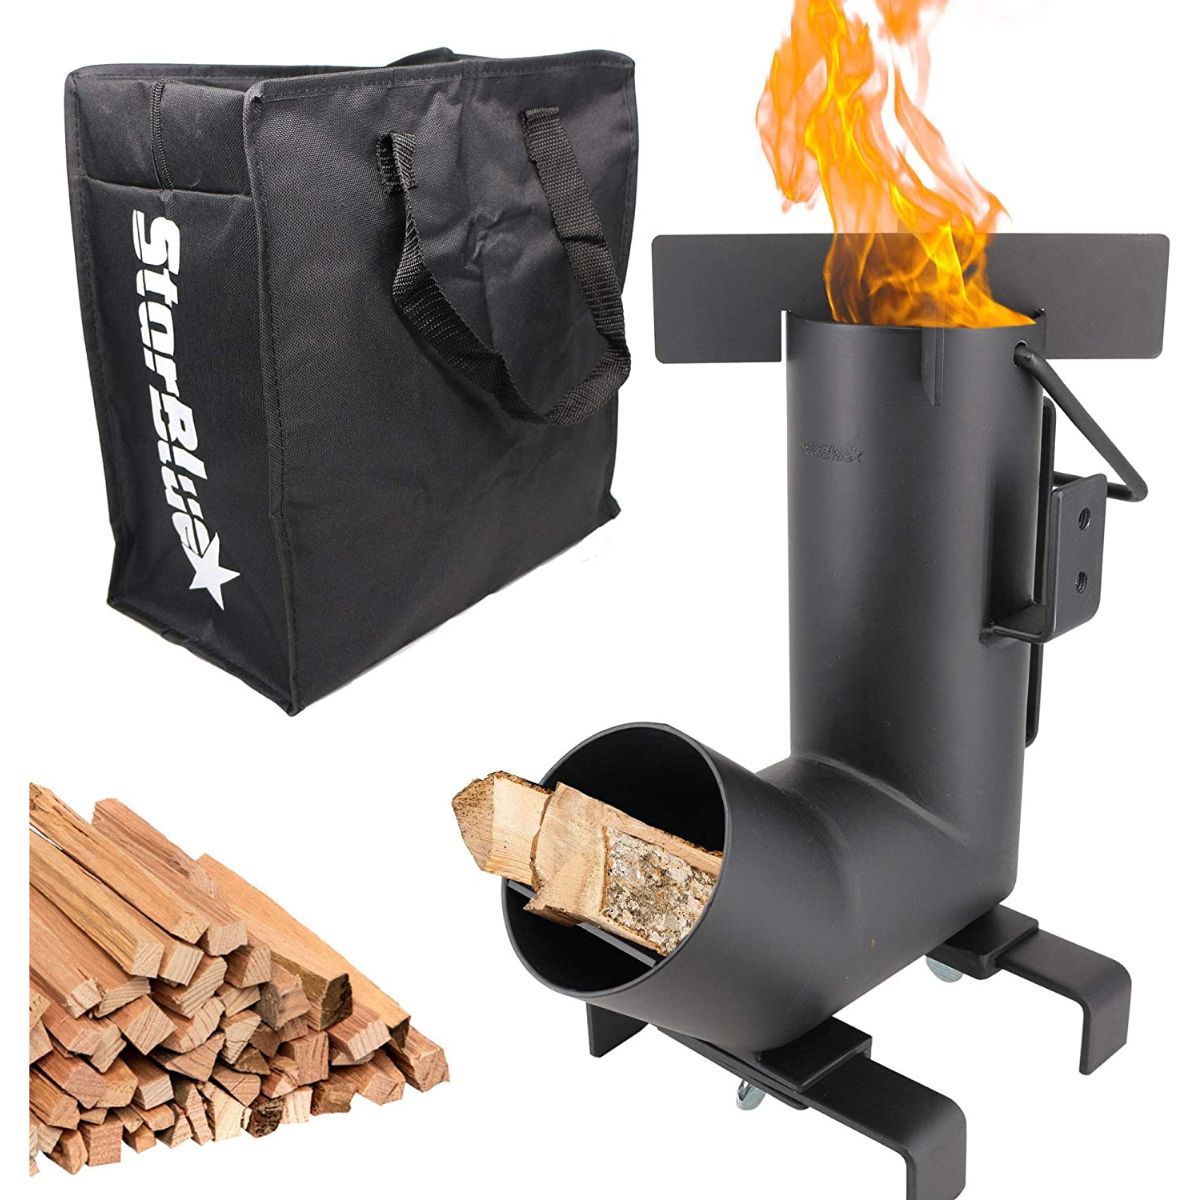 StarBlue Camping Rocket Stove 